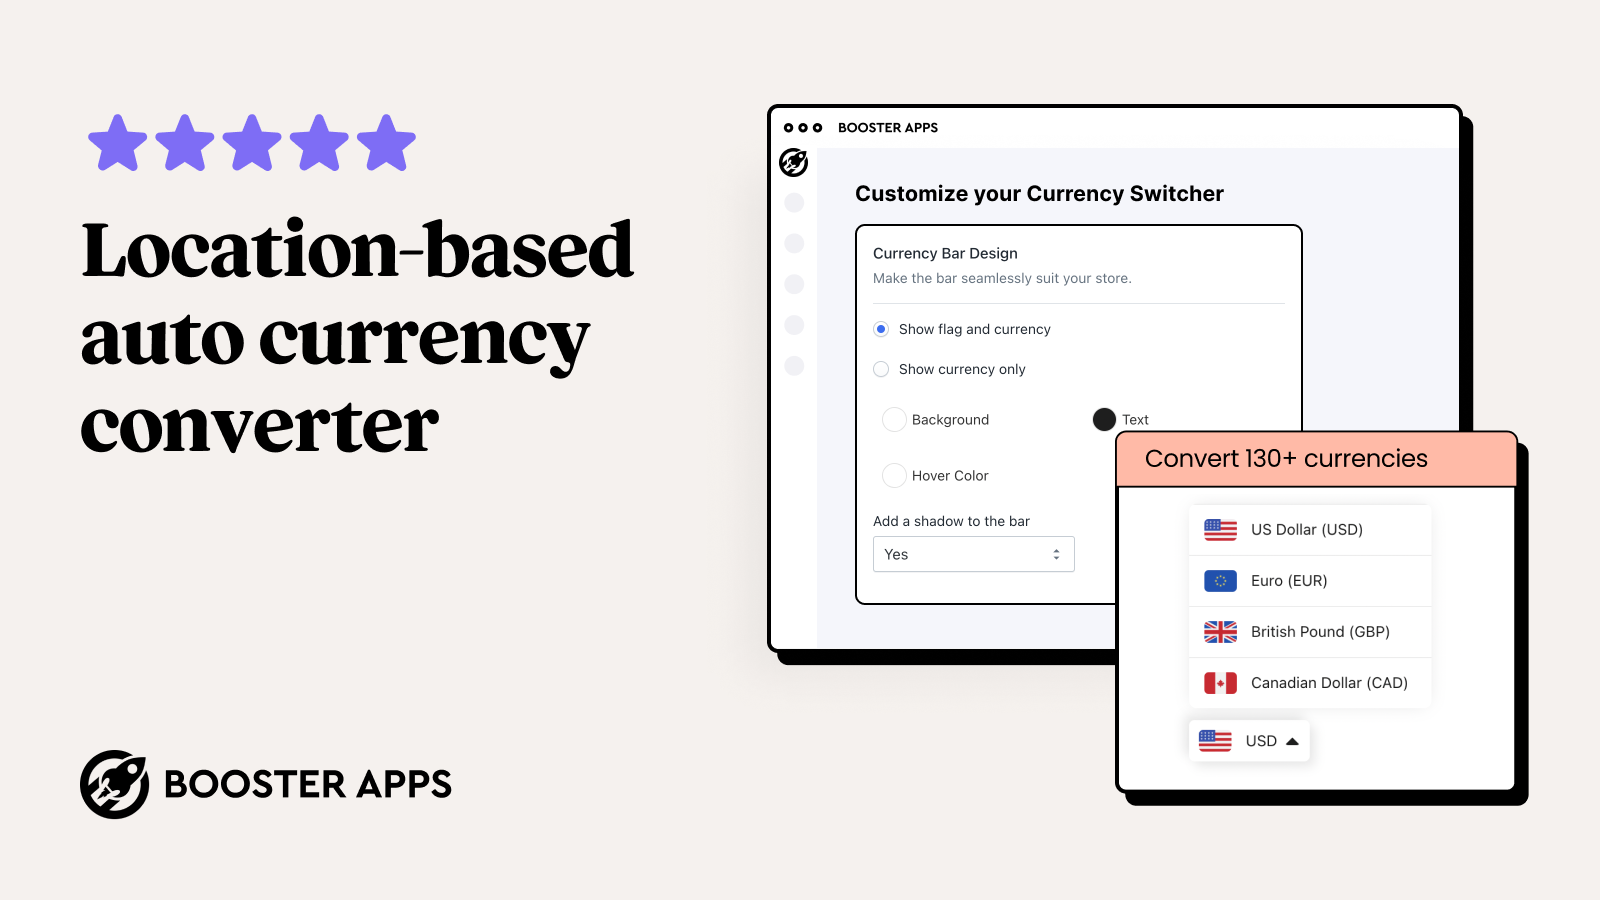 MULTI CURRENCY CONVERTER HERO - Booster Apps: Auto Currency Converter |  Shopify App Store